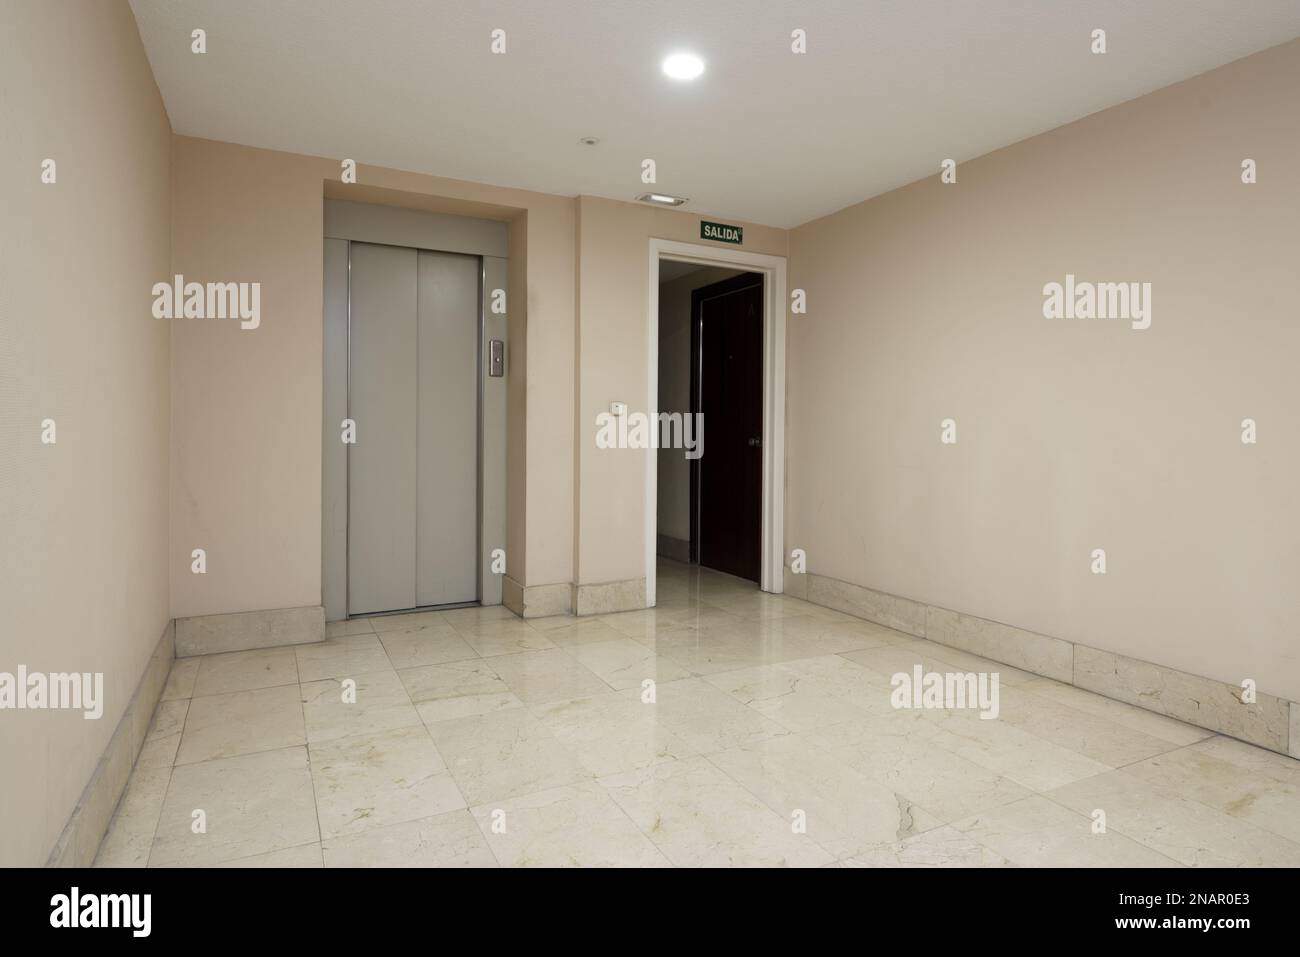 Interior of a residential housing portal with elevator with gray metal doors and polished cream marble floors Stock Photo